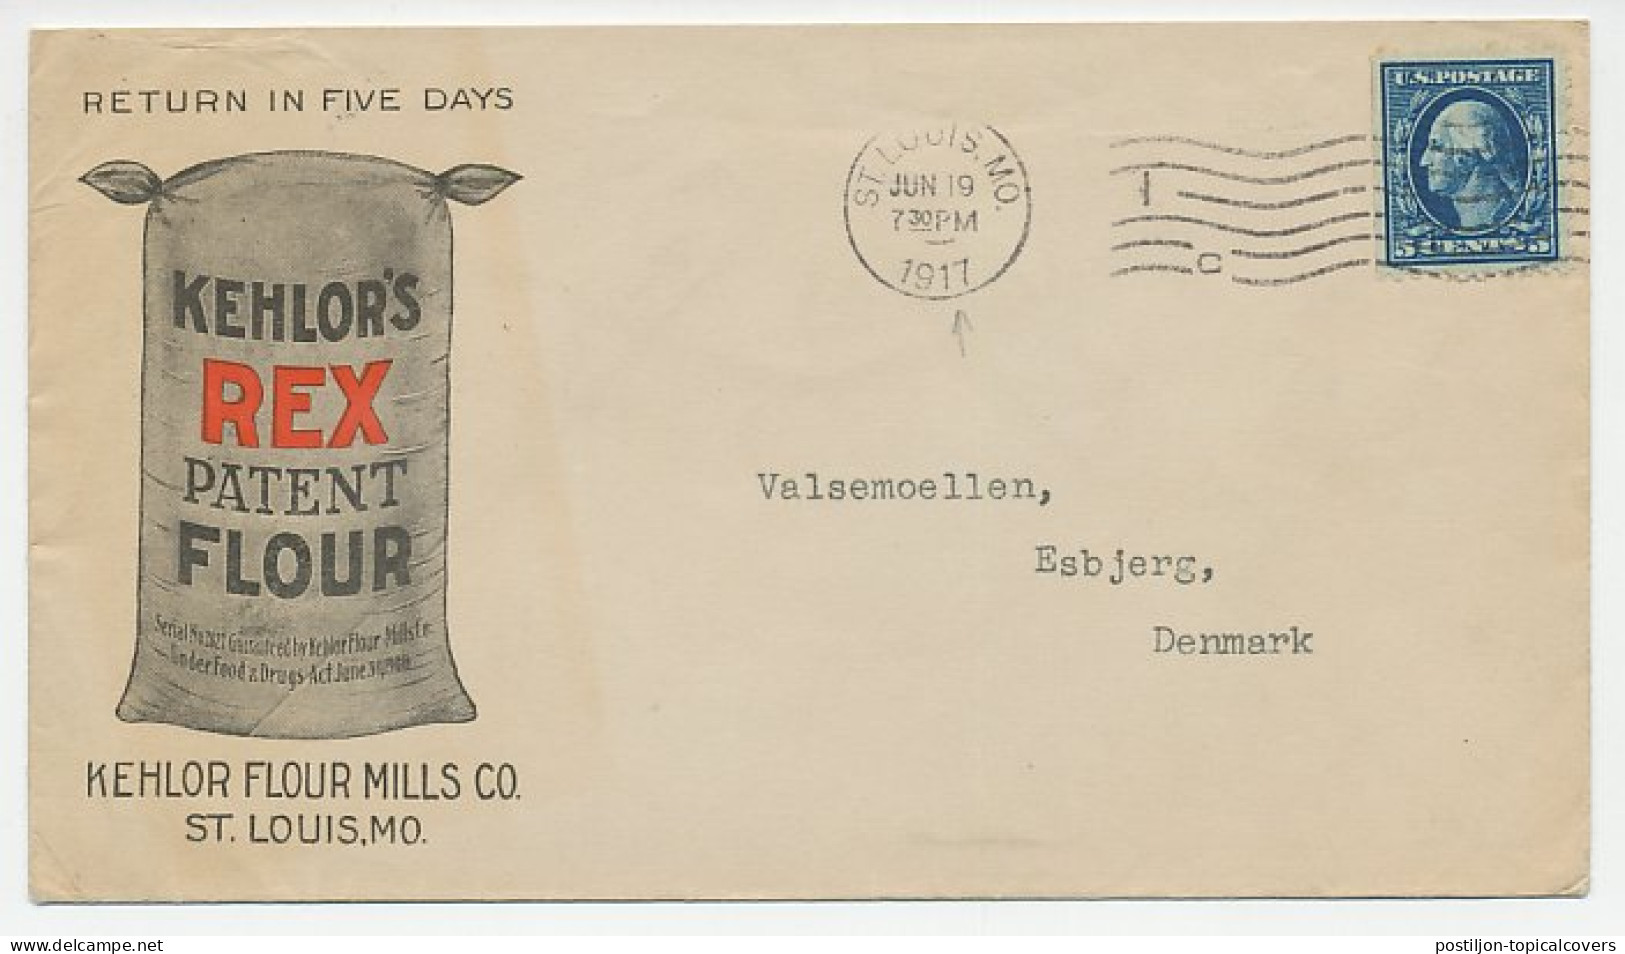 Illustrated Cover USA 1917 Patent Flour - Alimentation